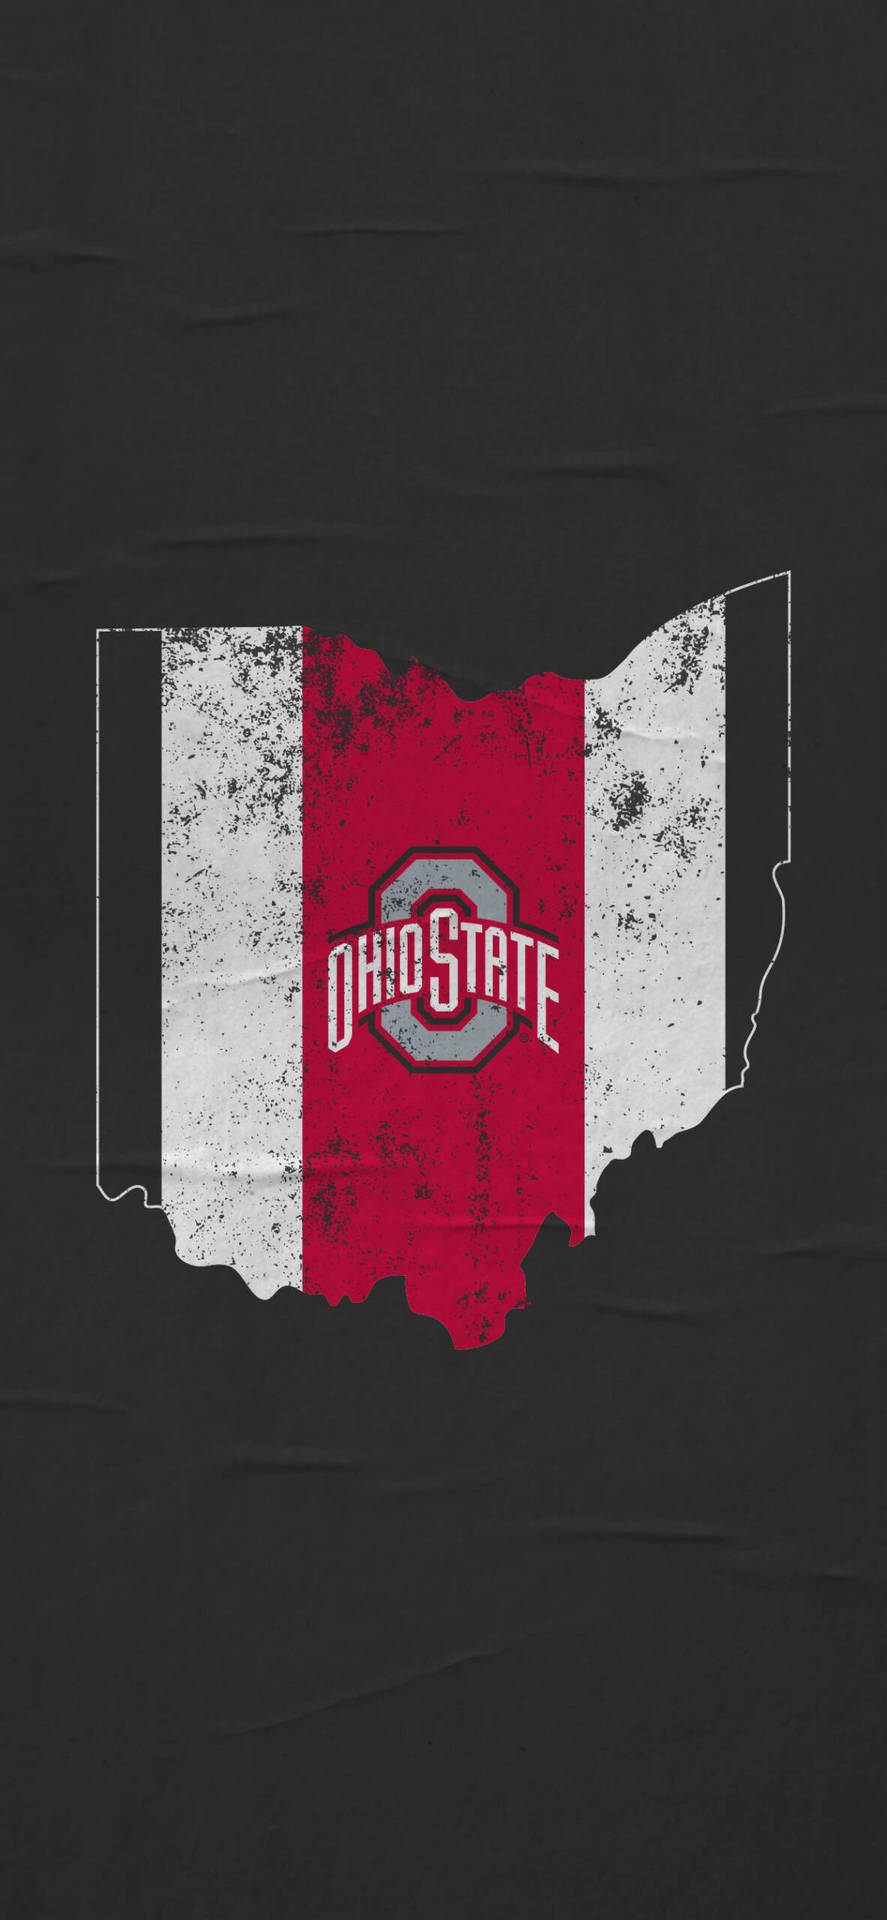 Ohio State University Colors And Map Picture